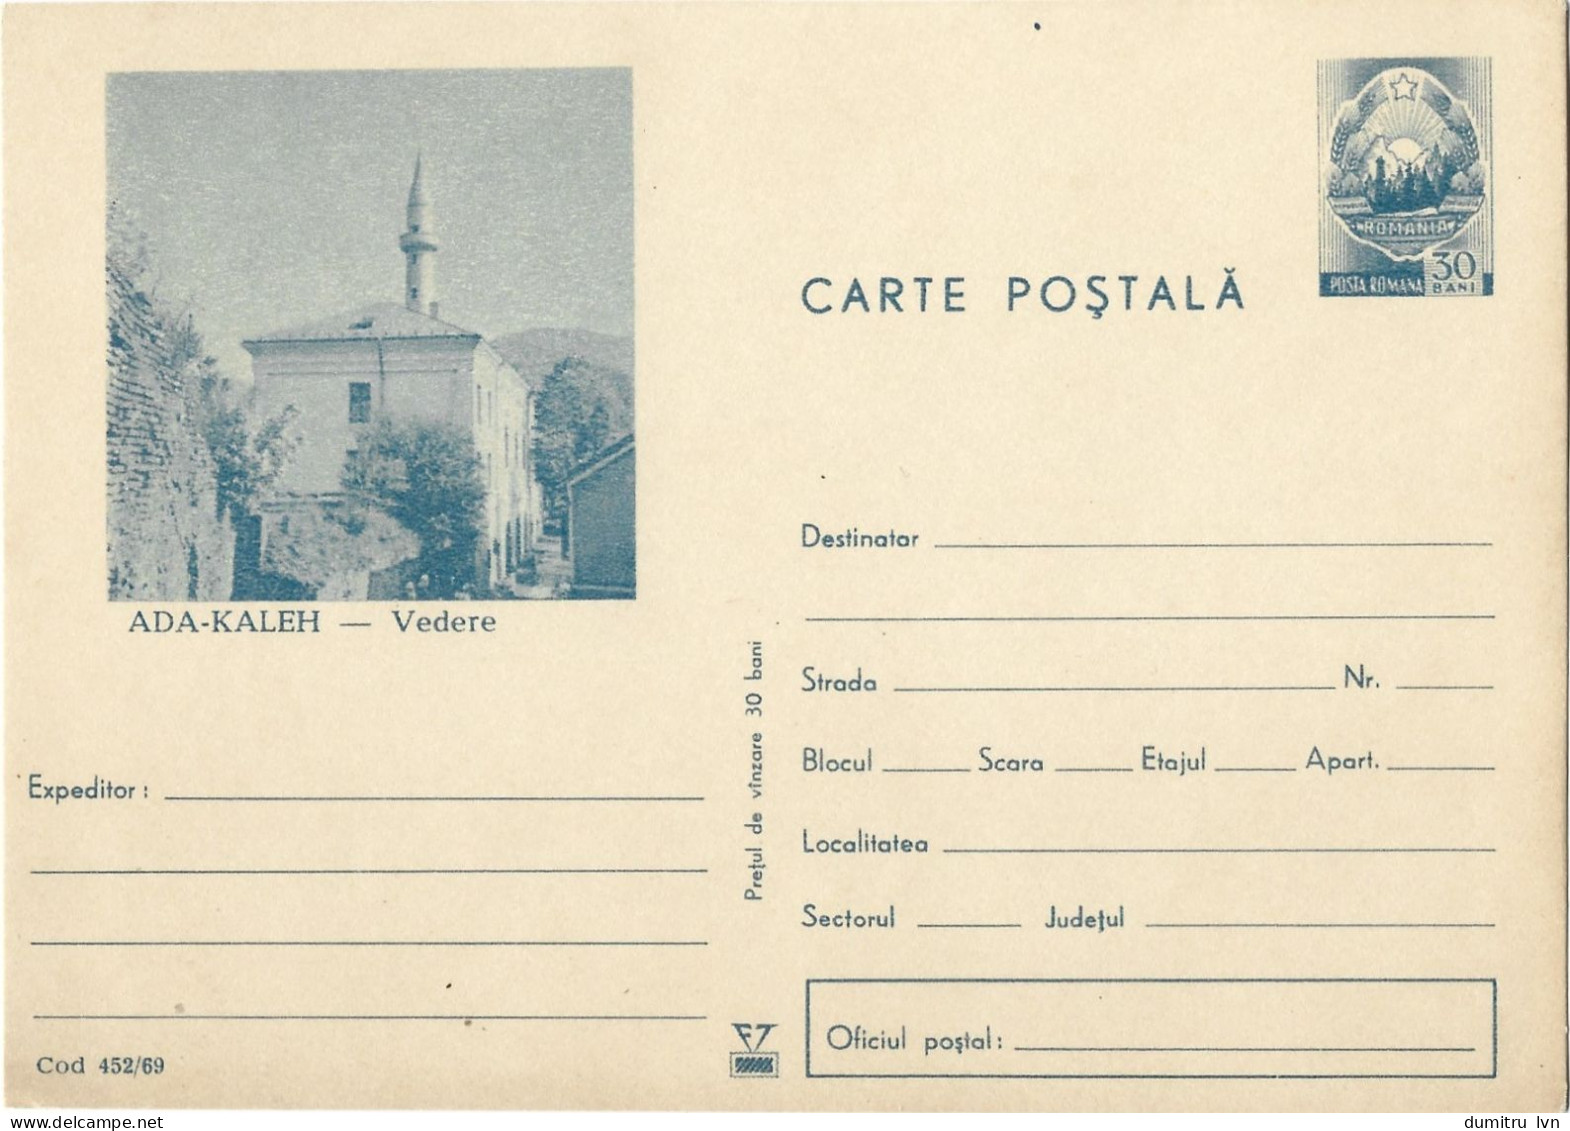 ROMANIA 1969 ADA-KALEH VIEW, MOSQUE, ARCHITECTURE, PEOPLE, POSTAL STATIONERY - Entiers Postaux